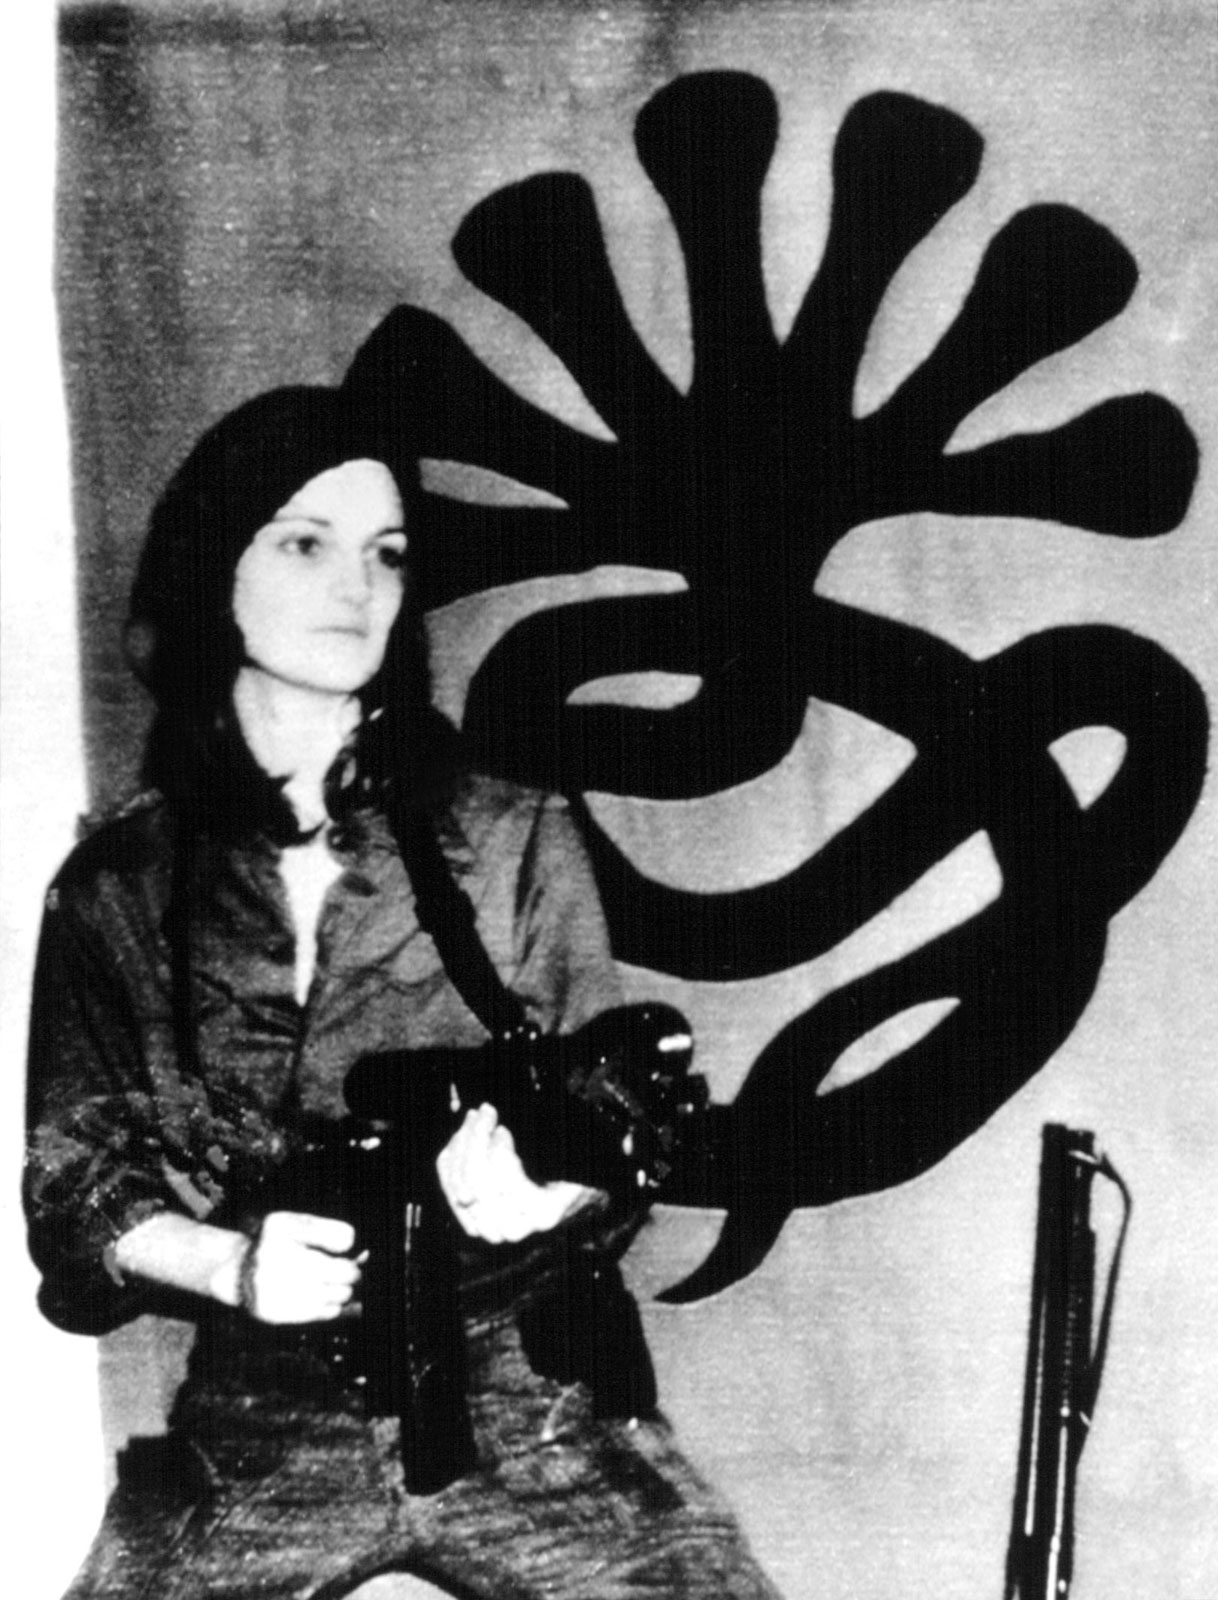 Patricia-Hearst-front-emblem-Symbionese-Liberation-Army.jpg